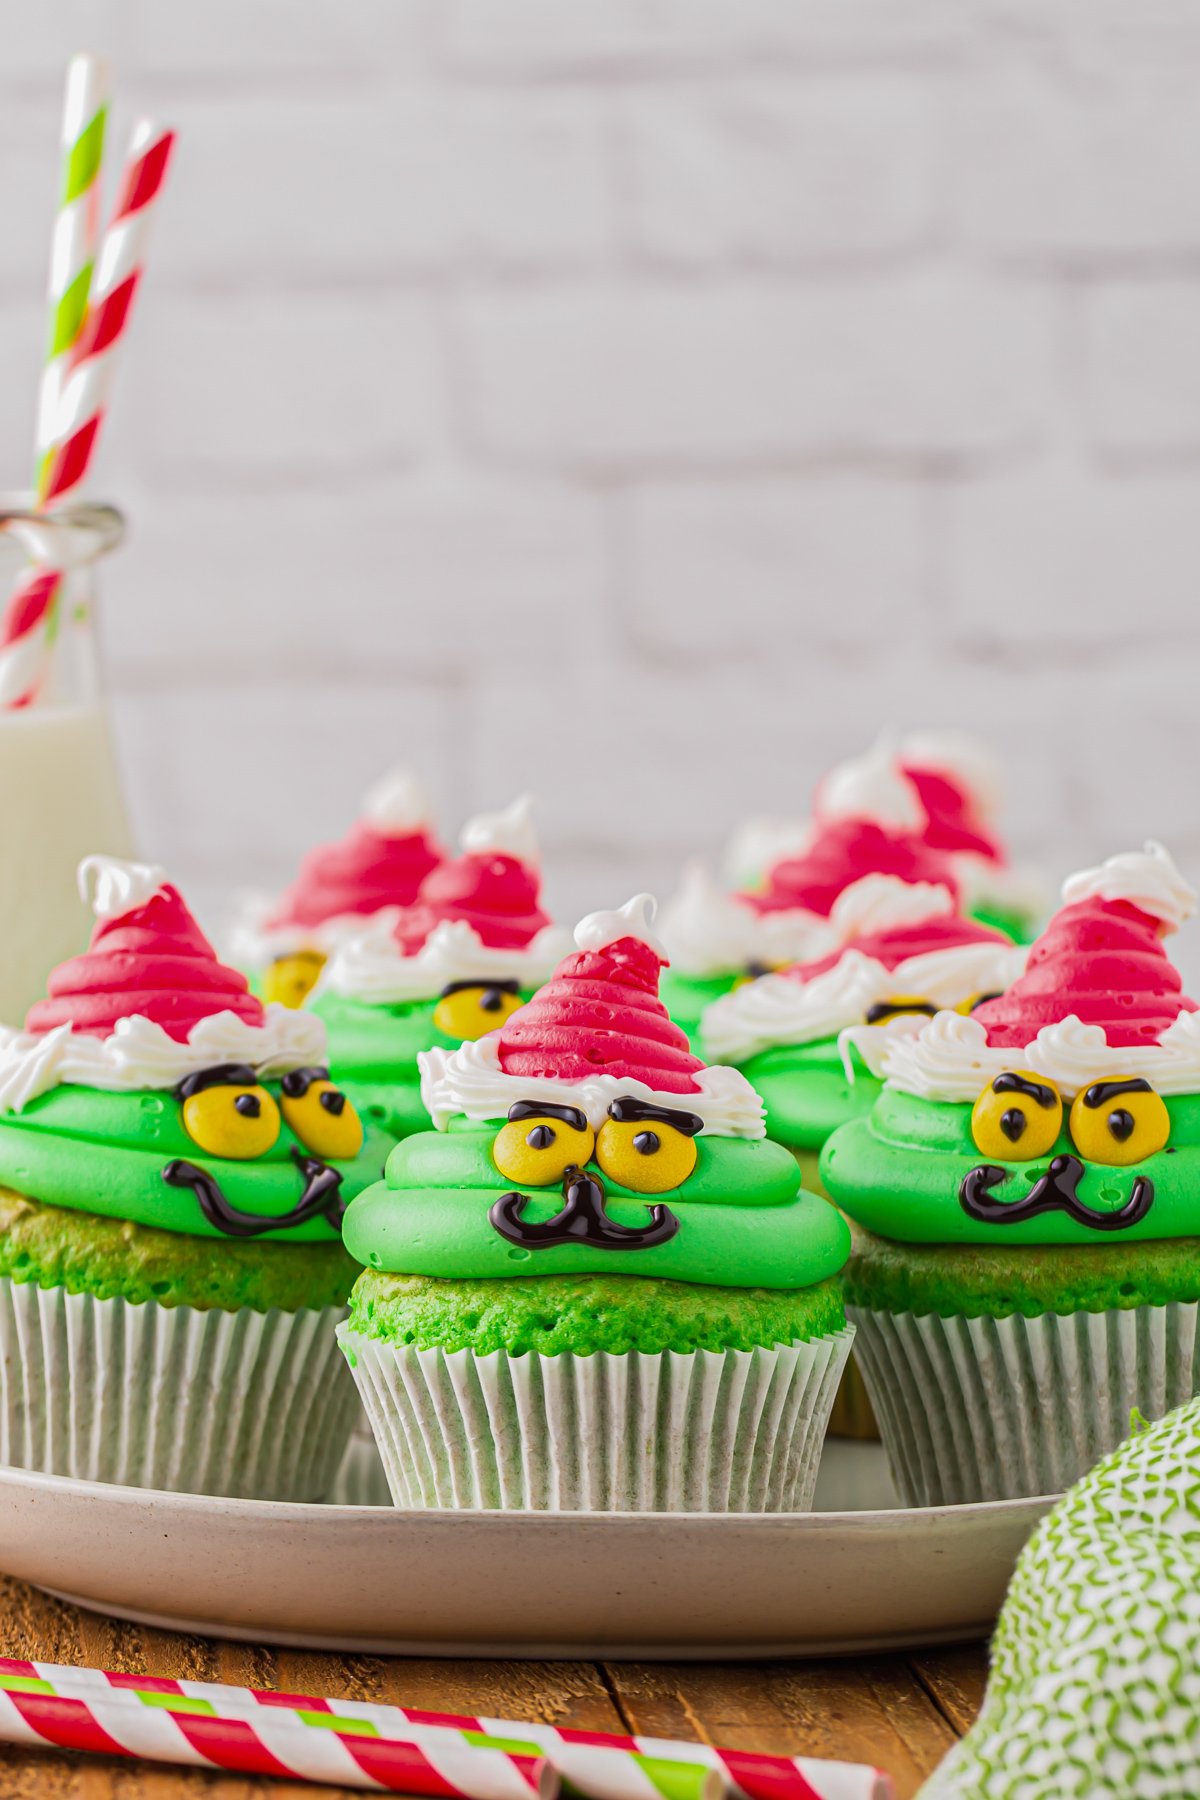 a plate of green cupcakes, decorated like the grinch